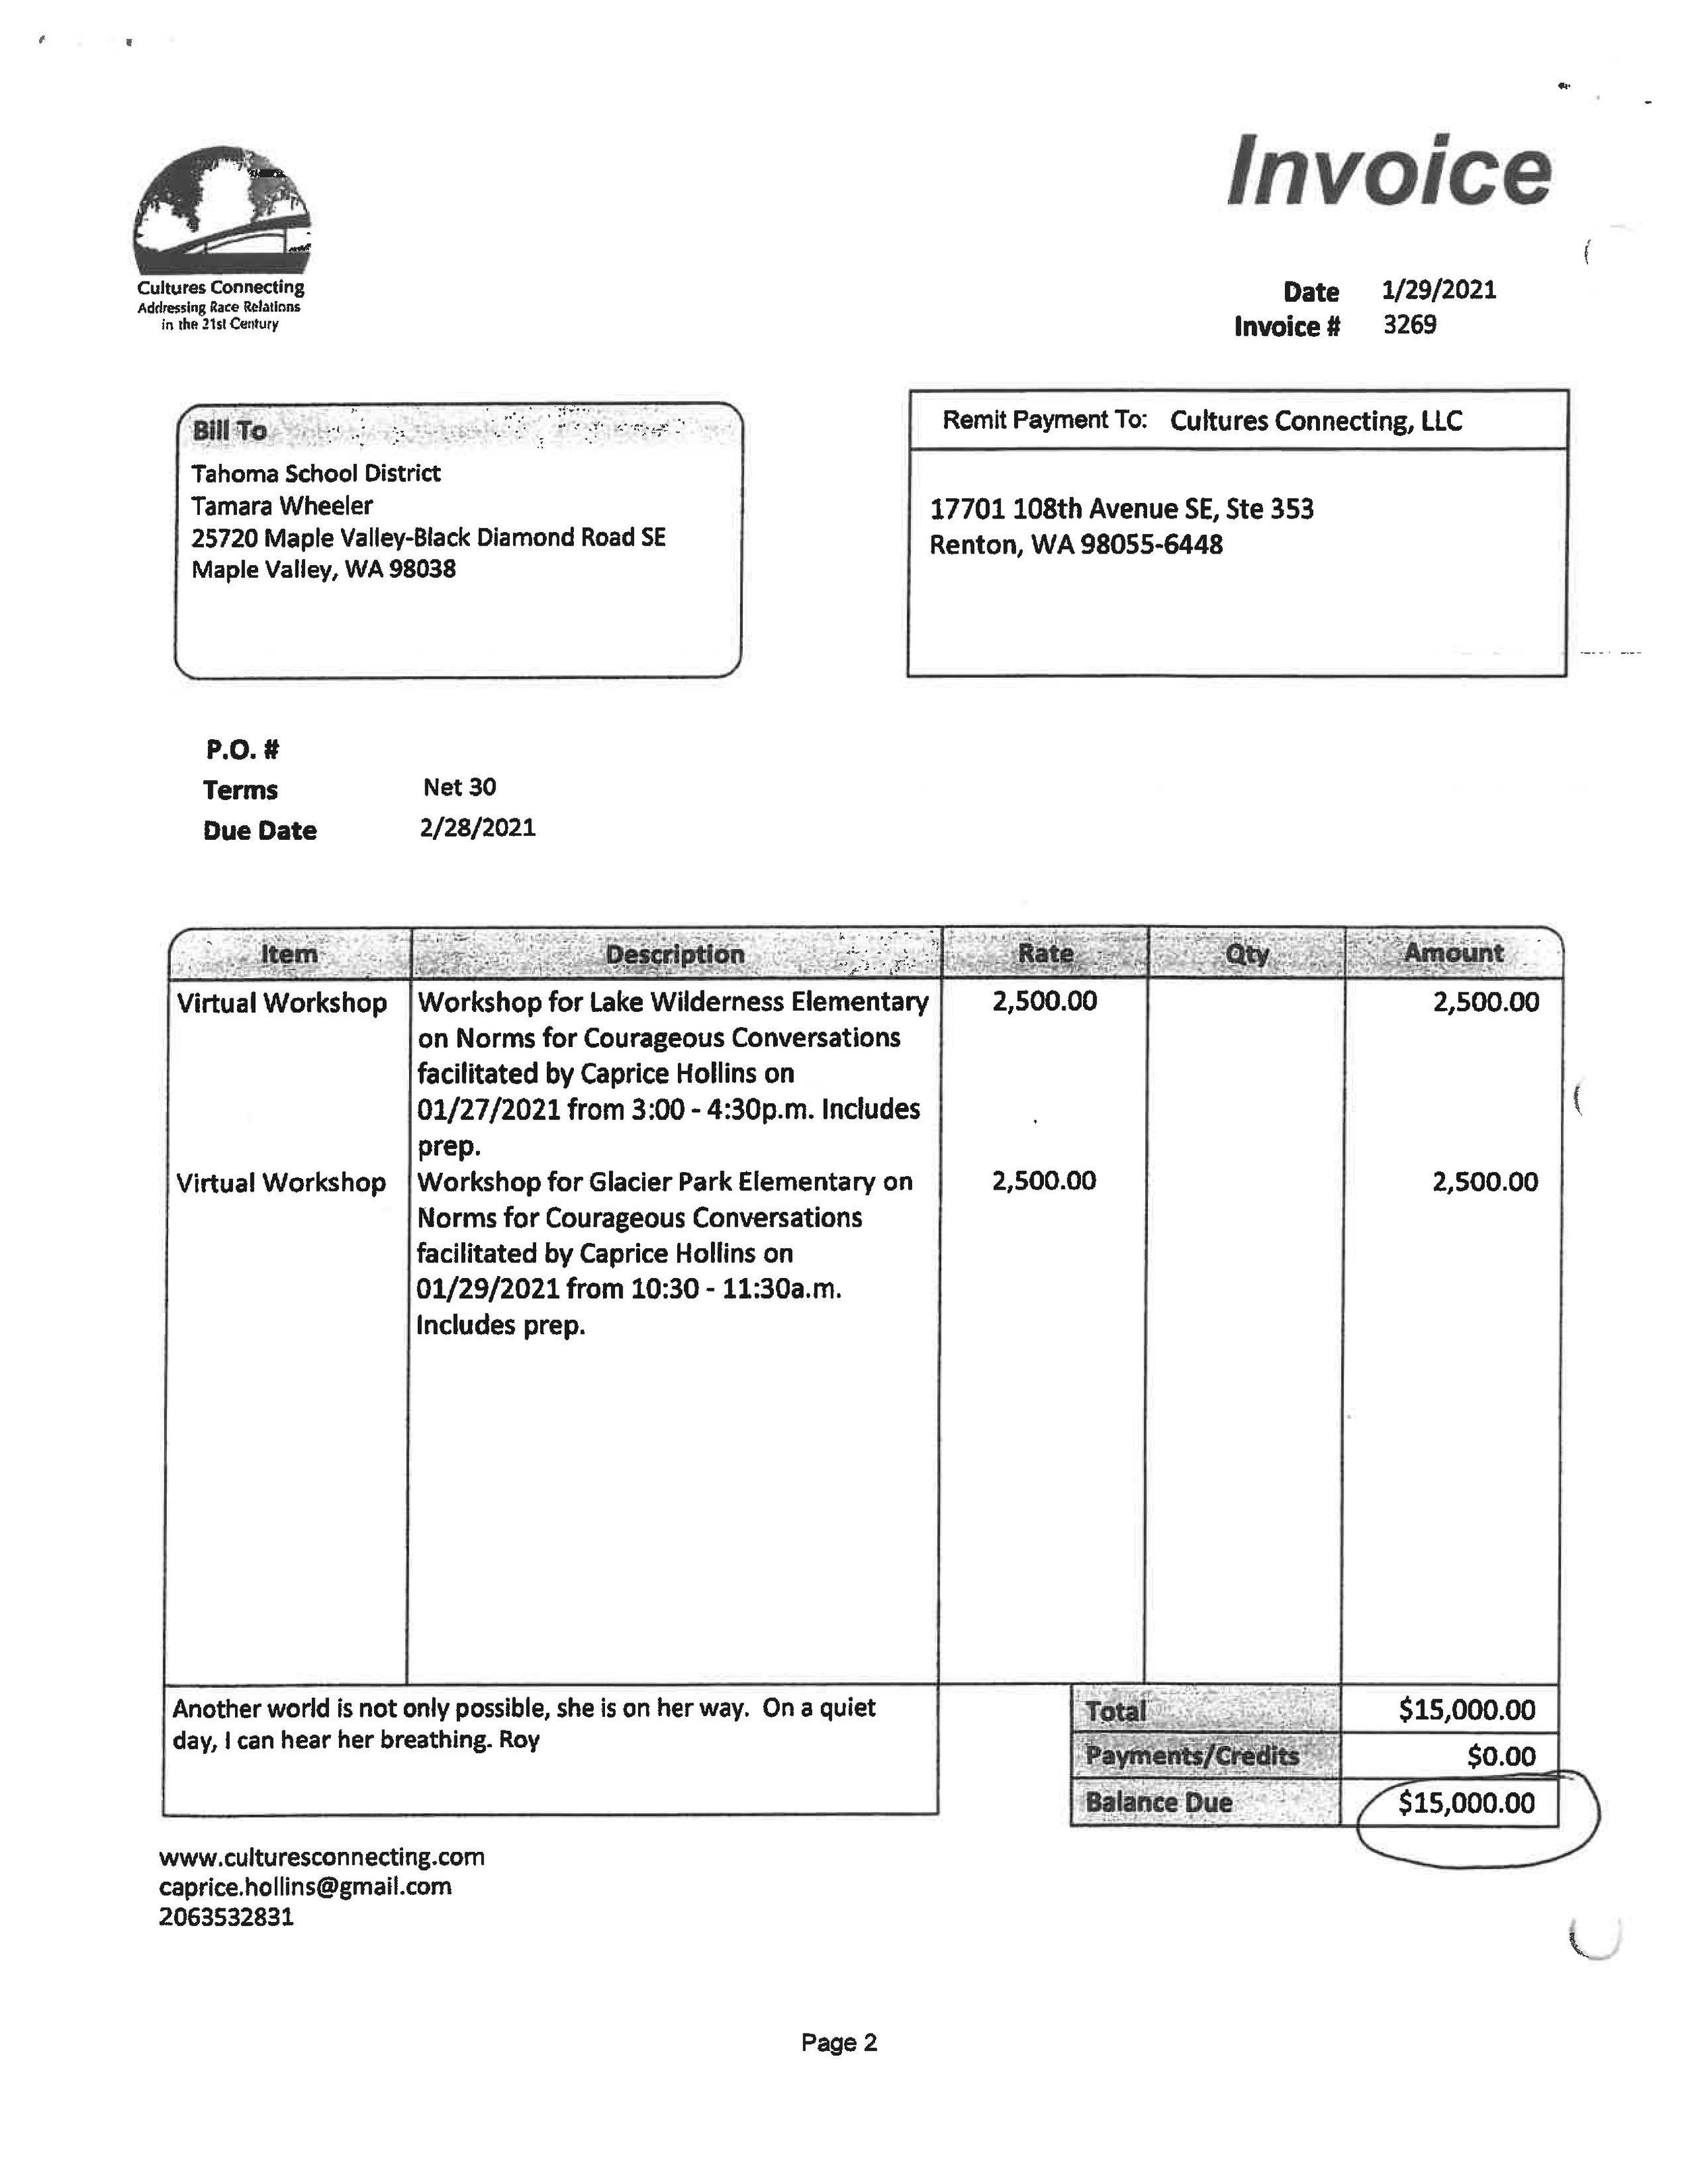 CH invoices_Page_07.jpg